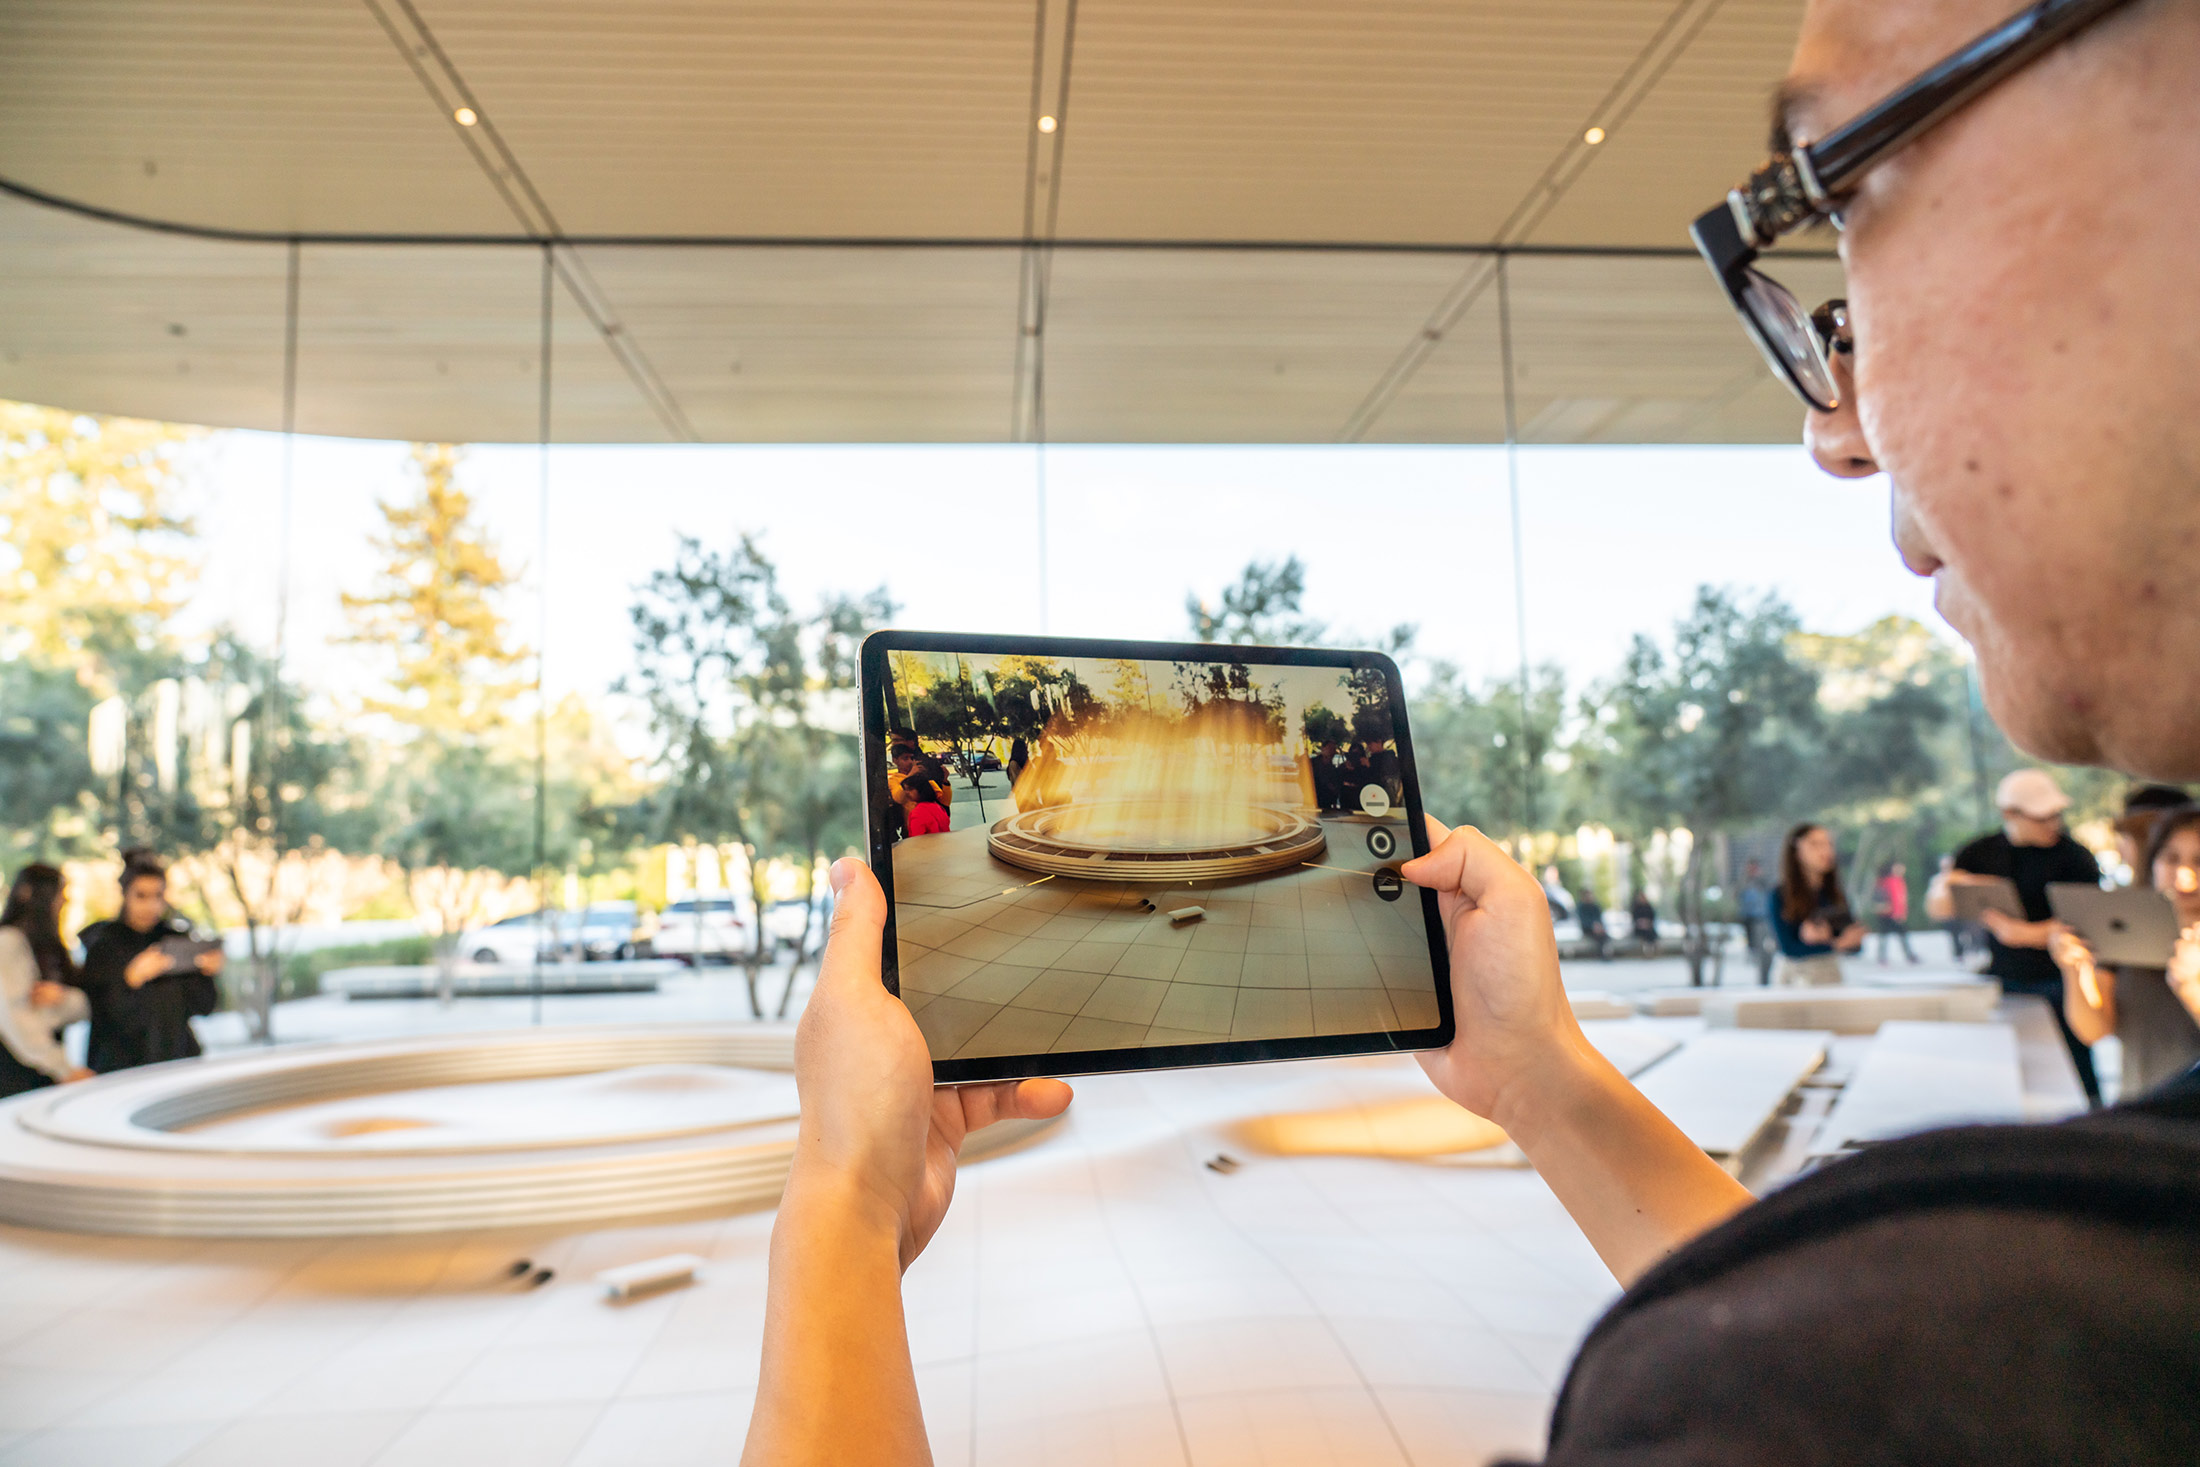 A customer uses an iPad for an augmented reality tour to see a virtual version of the Apple Park campus in Cupertino, California.